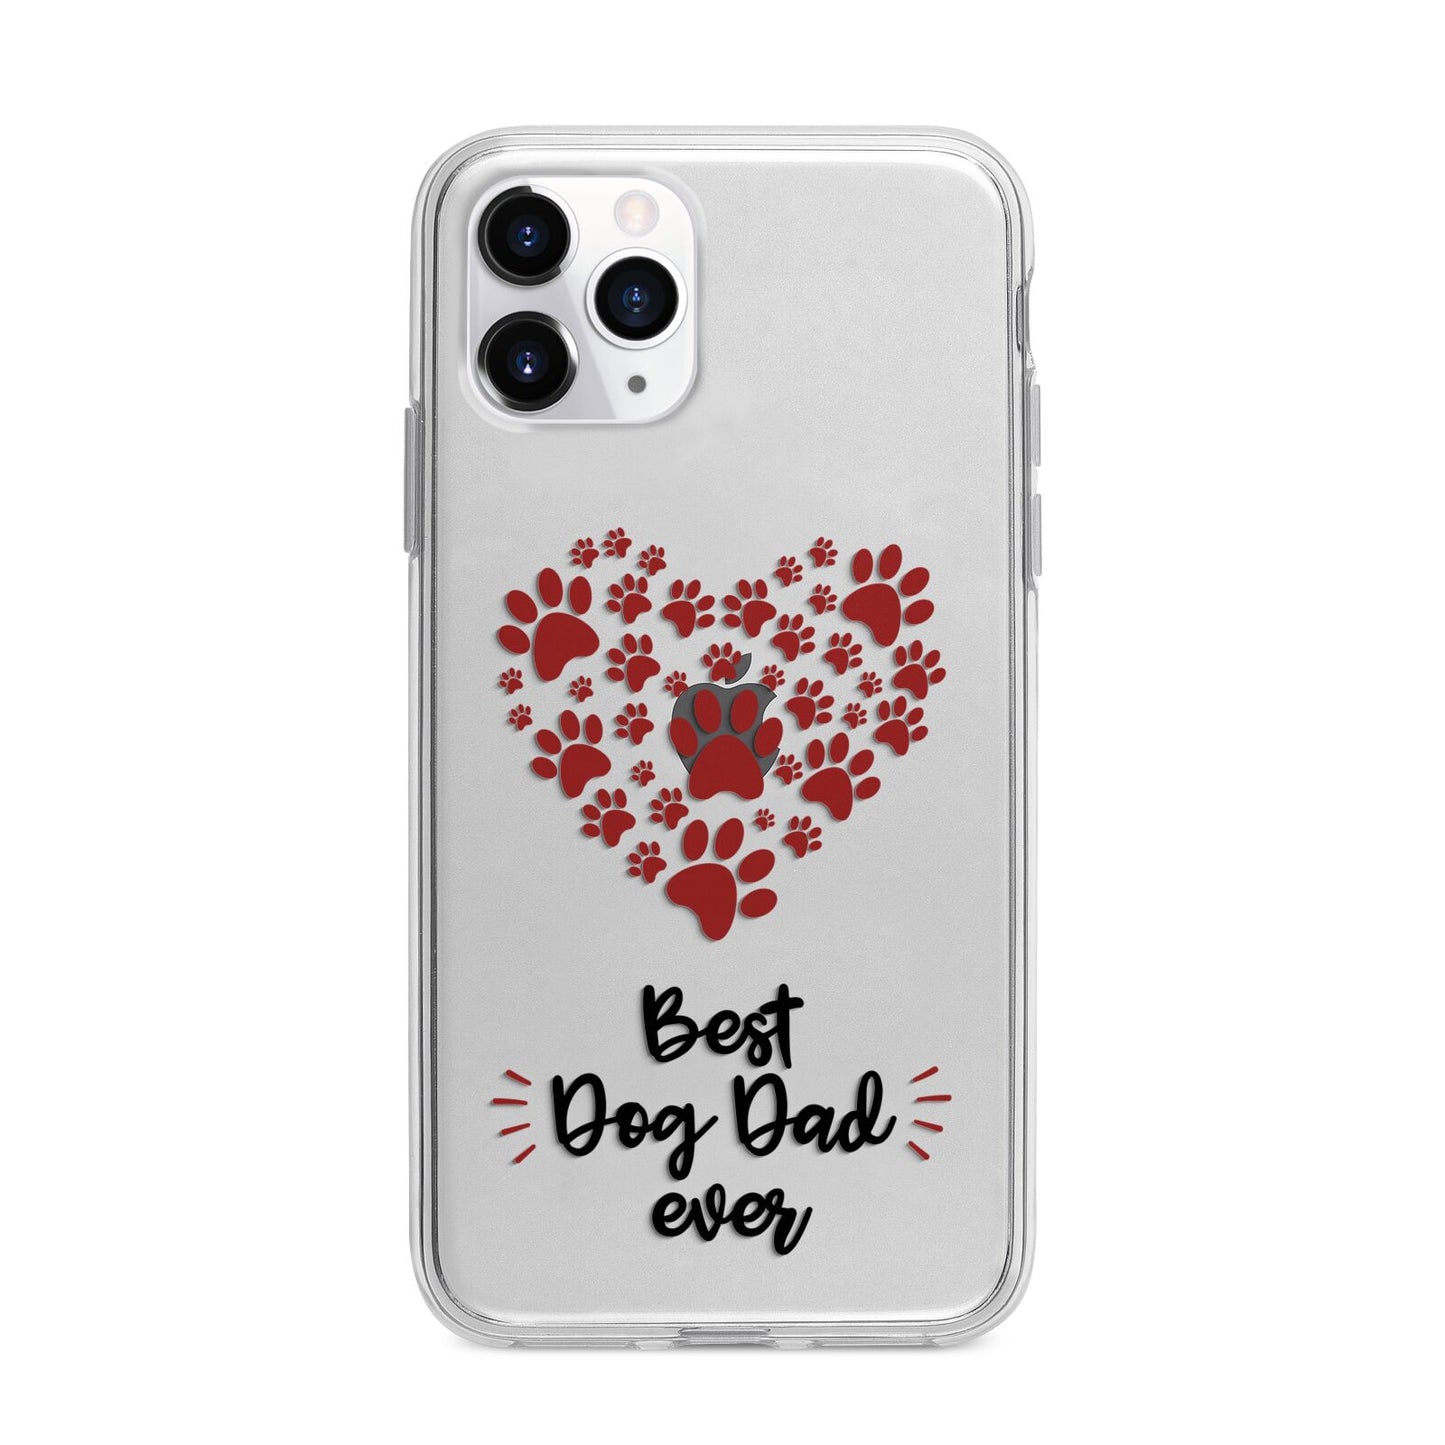 Best Dog Dad Paws Apple iPhone 11 Pro in Silver with Bumper Case